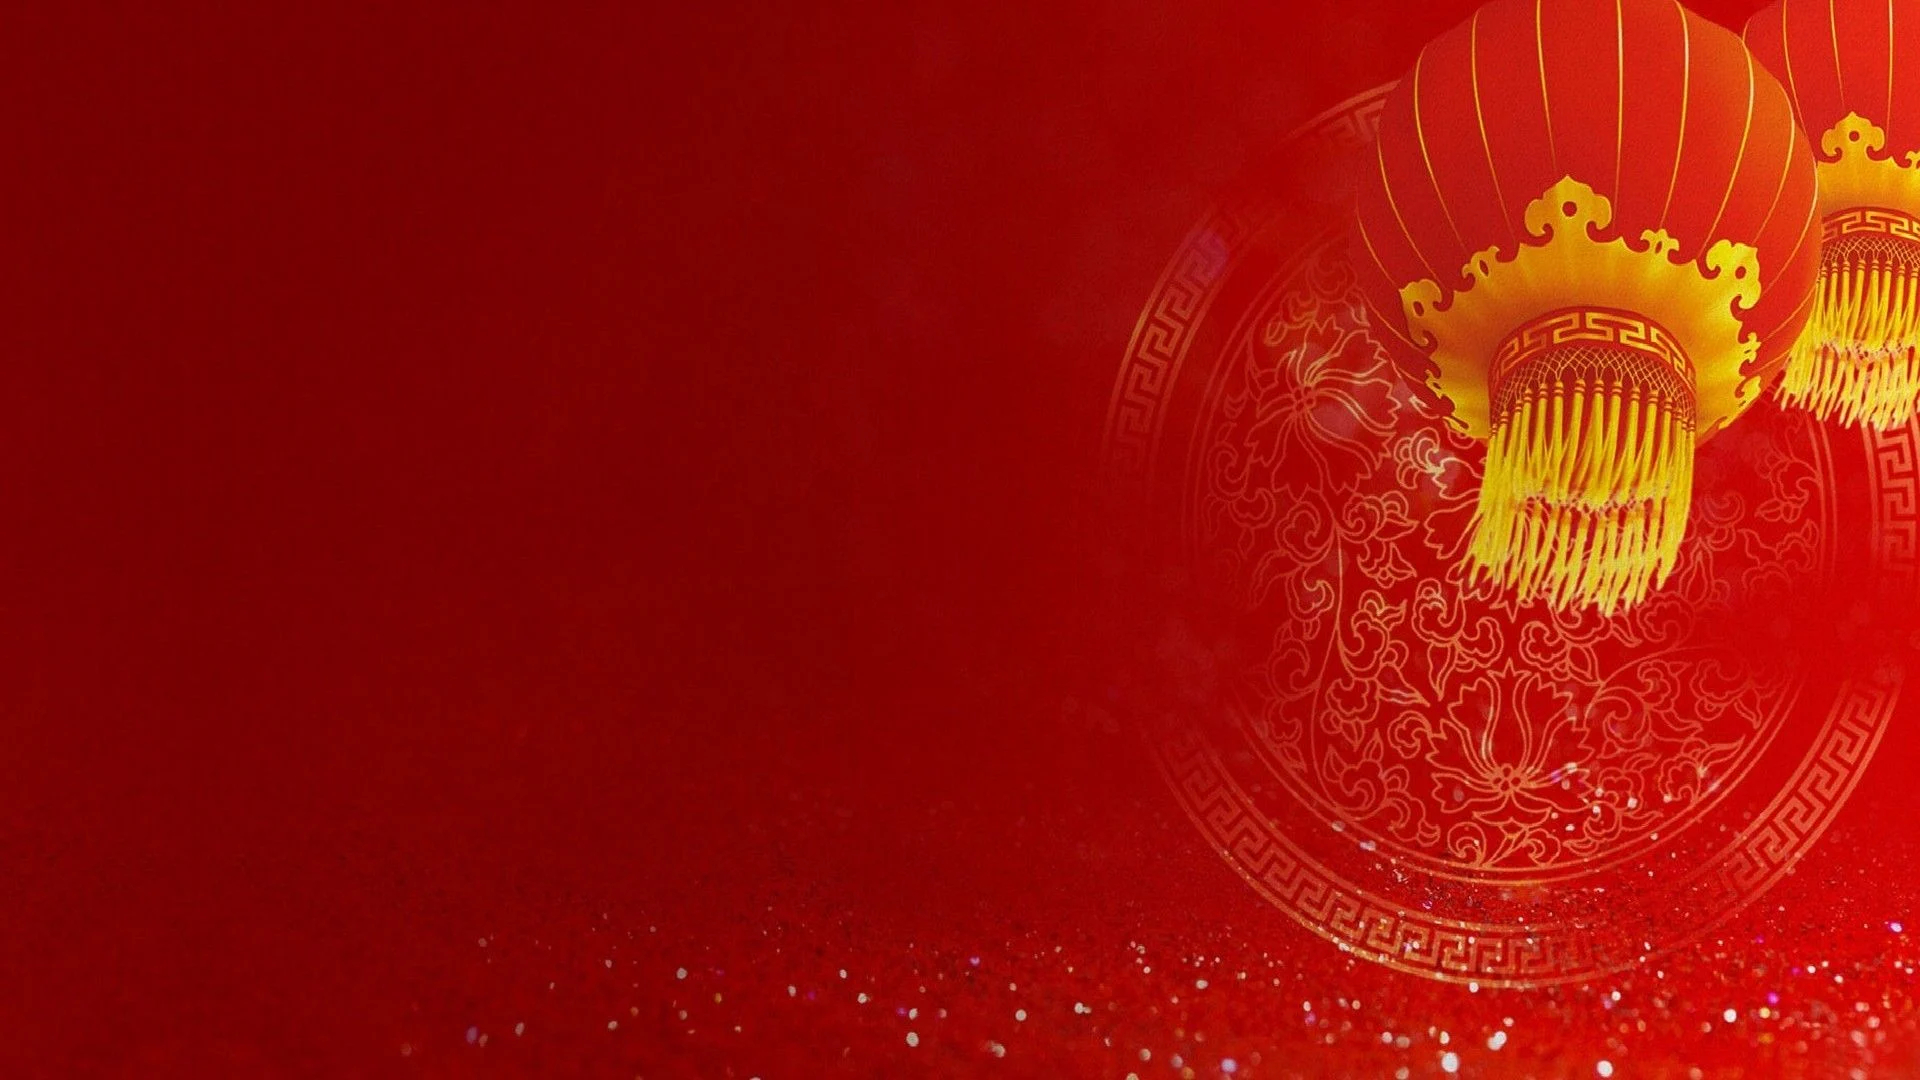 1920x1080 Chinese New Year Desktop Wallpapers Top Free Chinese New Year Desktop Backgrounds